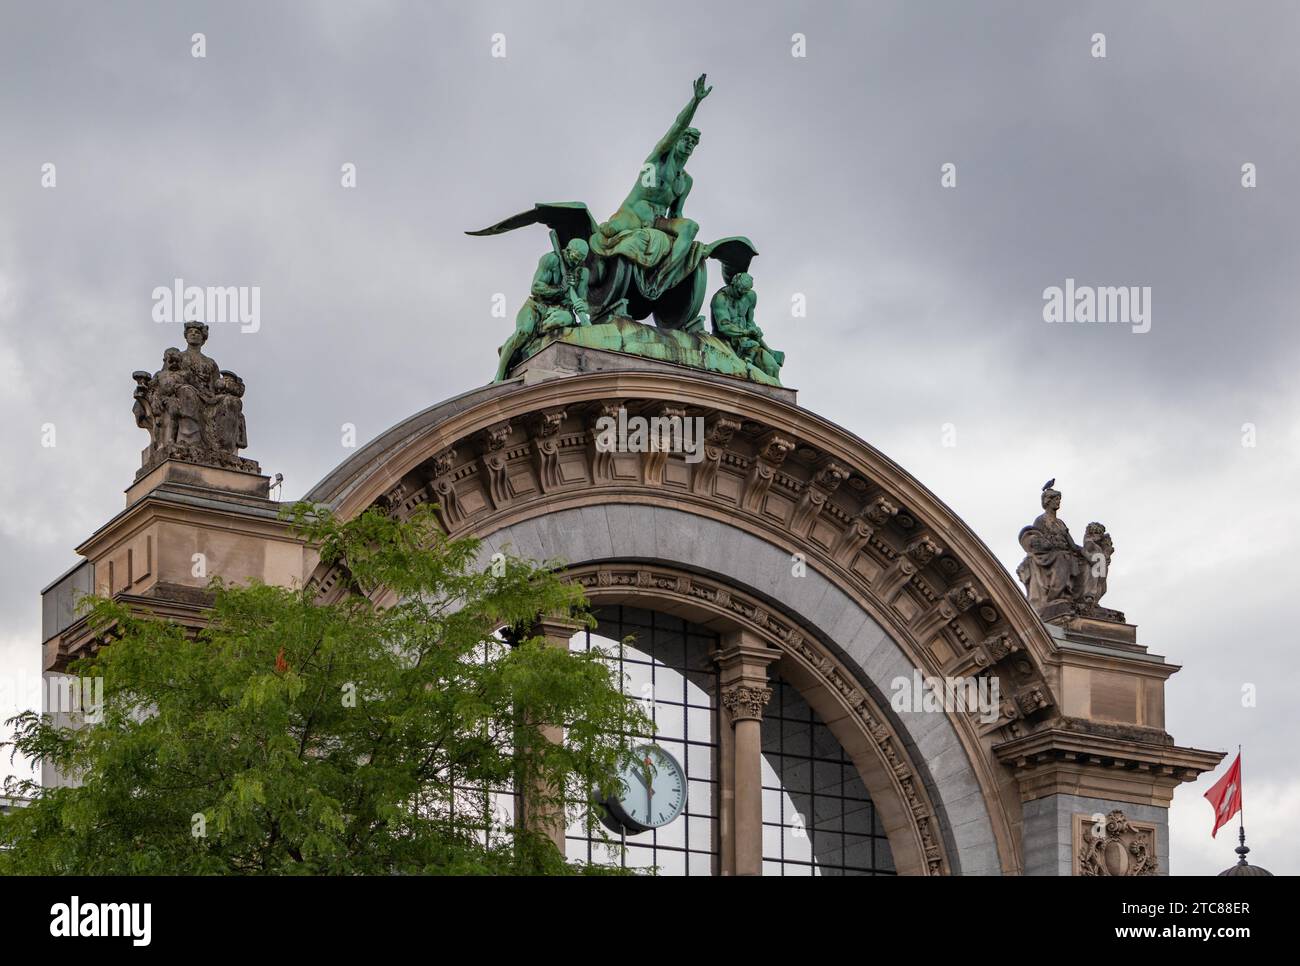 A picture of the Torbogen Lucerne monument in front of the Lucerne Train Station Stock Photo